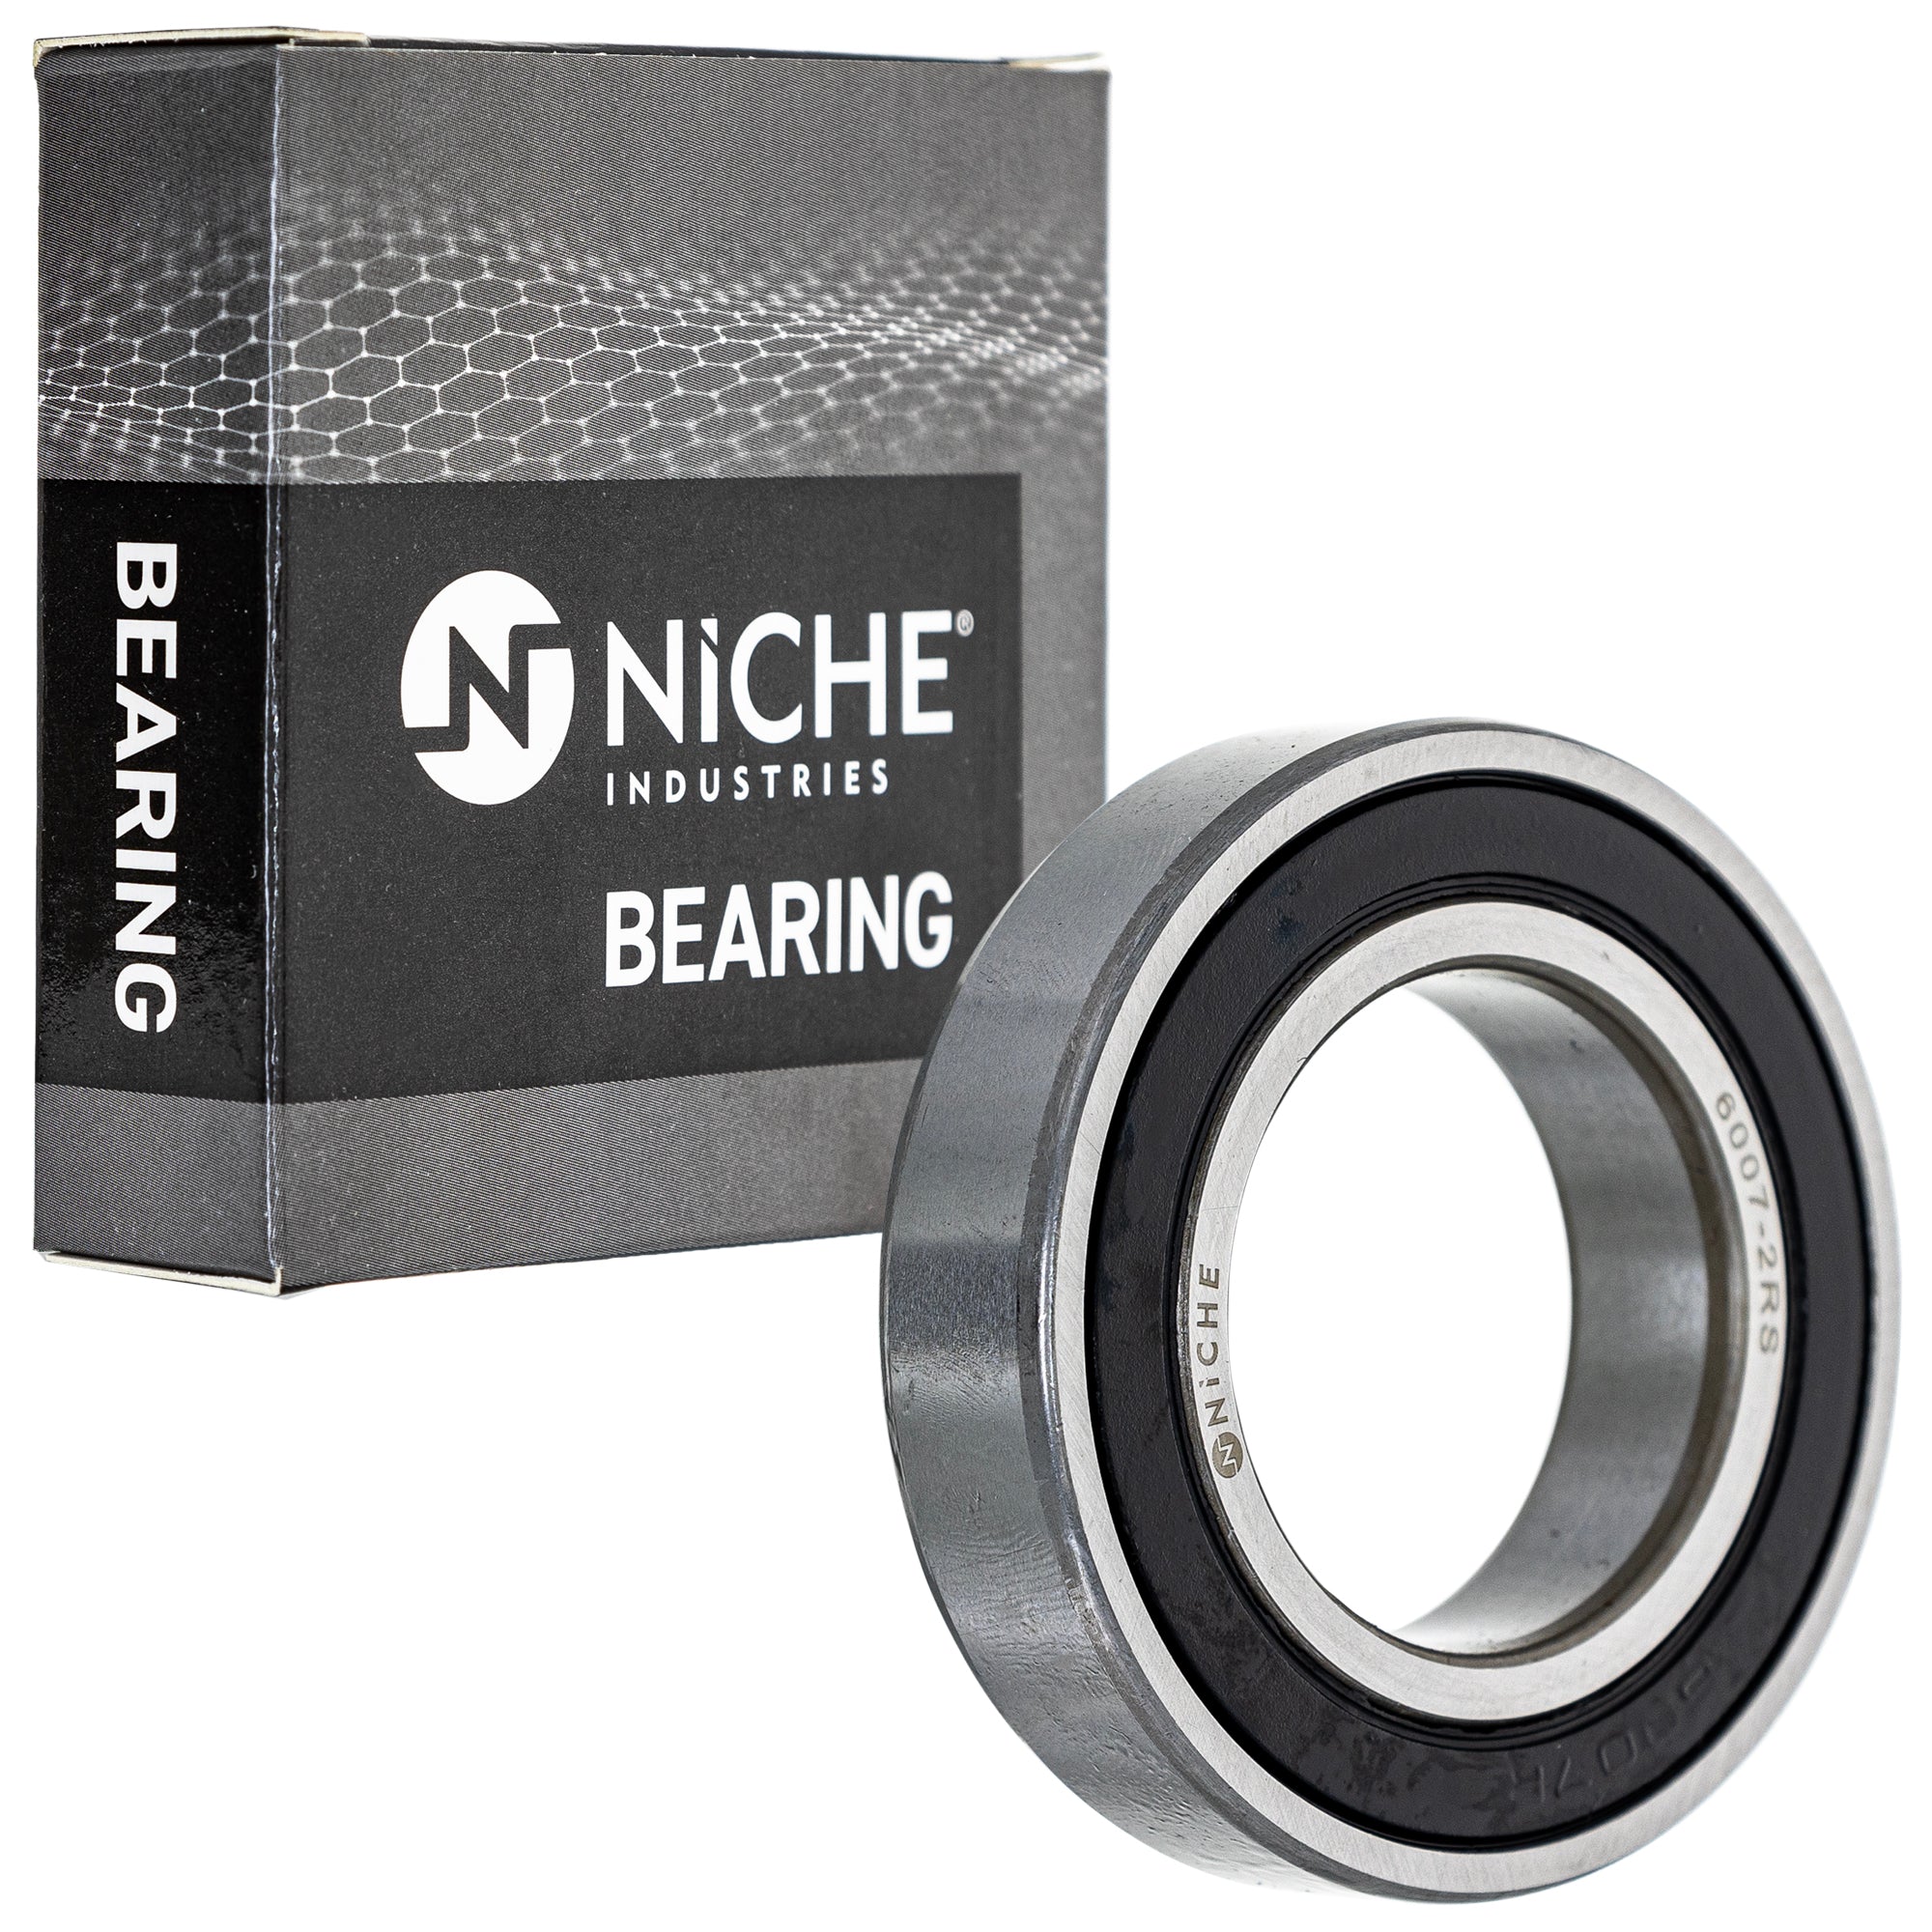 NICHE 519-CBB2220R Bearing 2-Pack for zOTHER Polaris BRP Can-Am